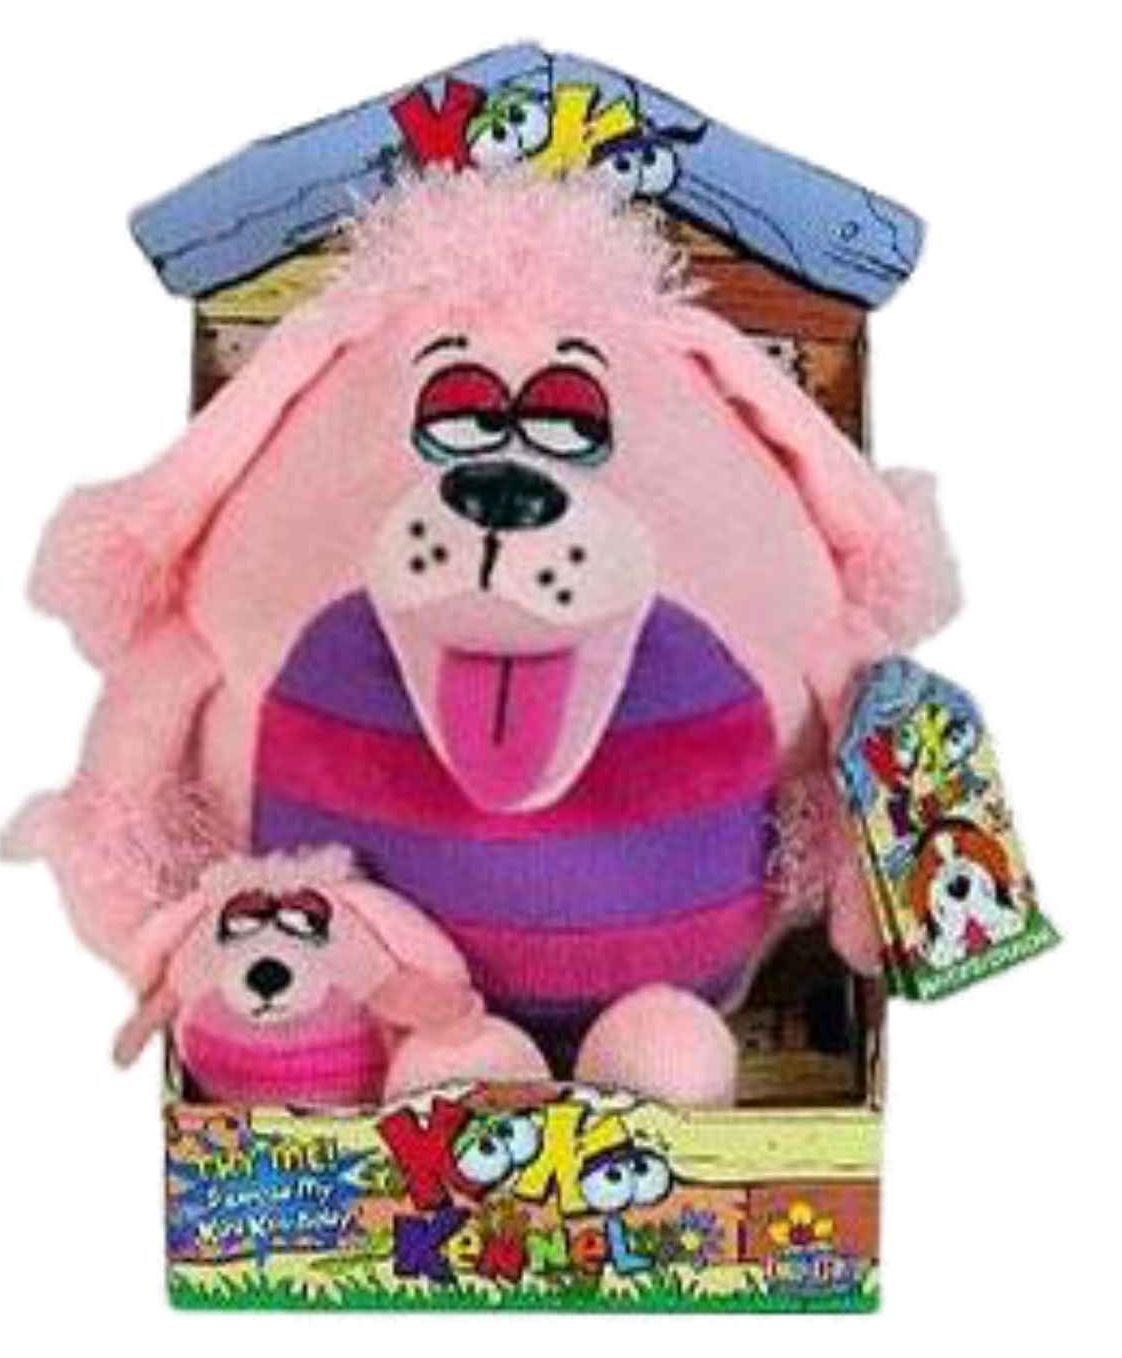 Jay at Play KooKoo Kennel Barking Plush with Mini Puppy Dog - Pink Poodle Stuffed Animal Pal